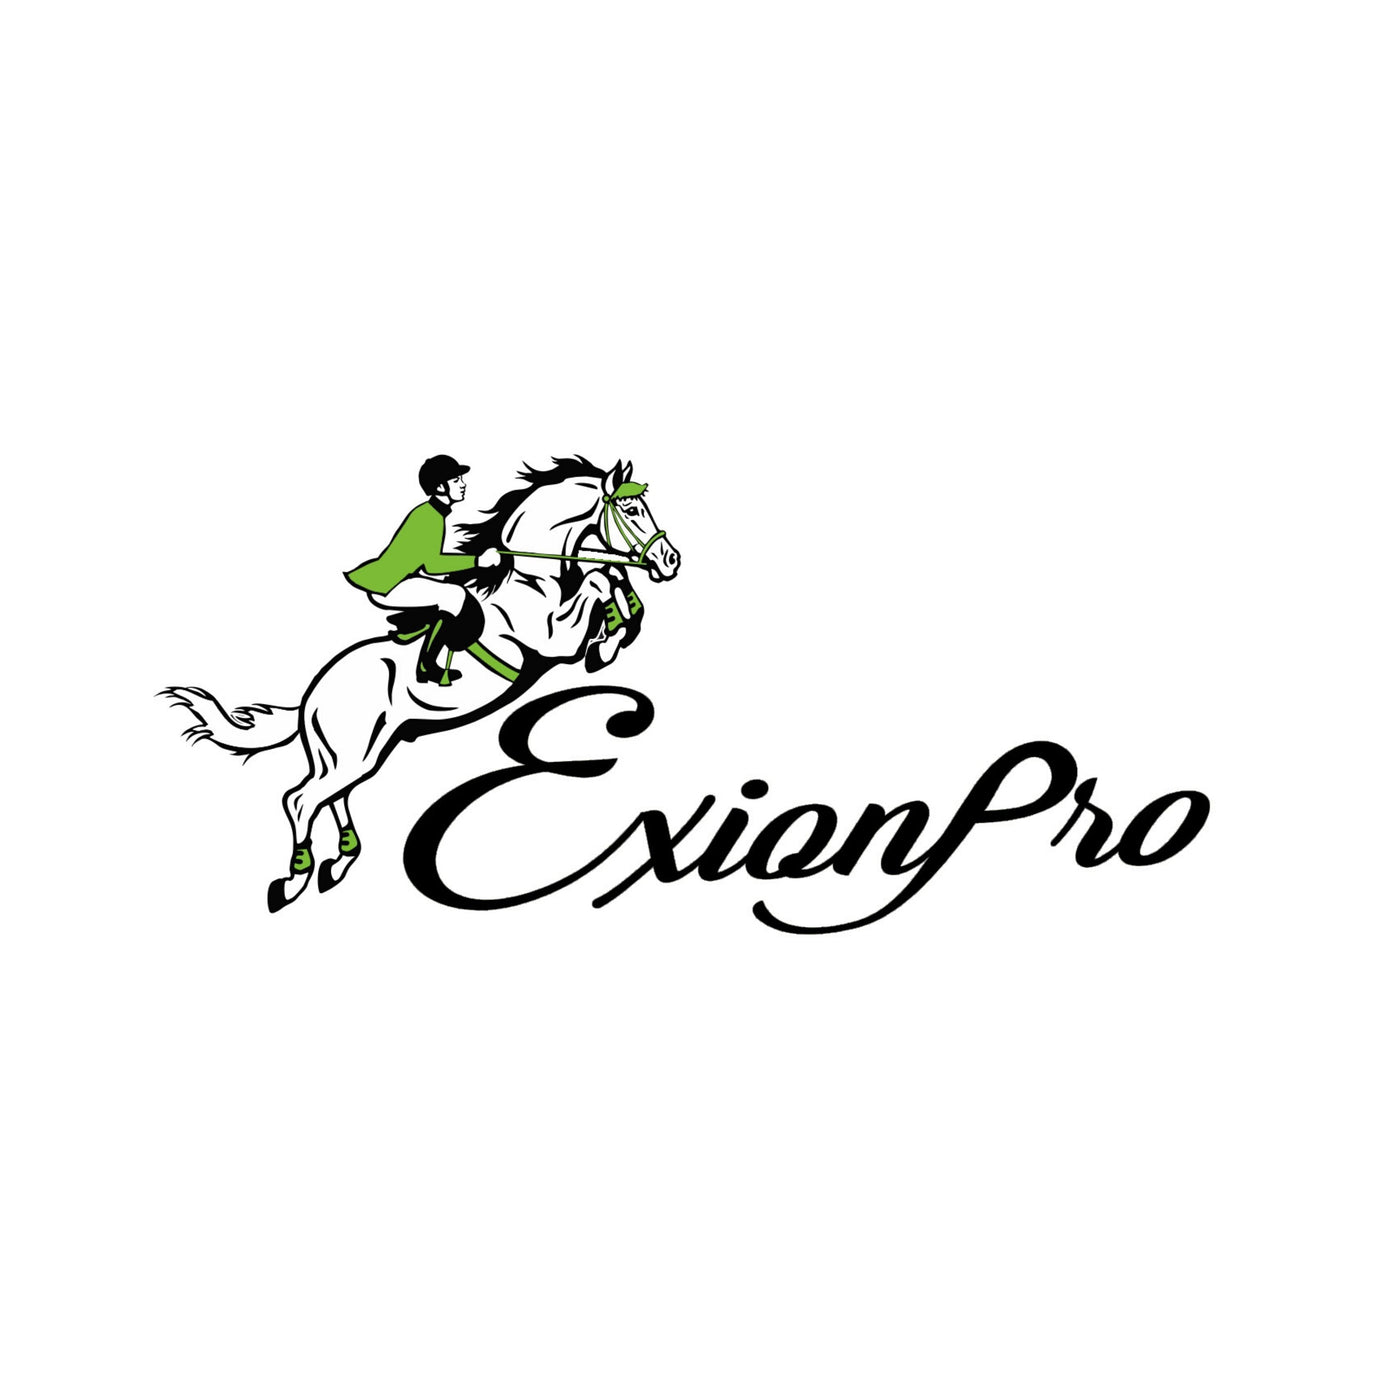 ExionPro Anti-Pressure Anatomic Jumping Raised Padded Fancy Wave Stitched Bridle